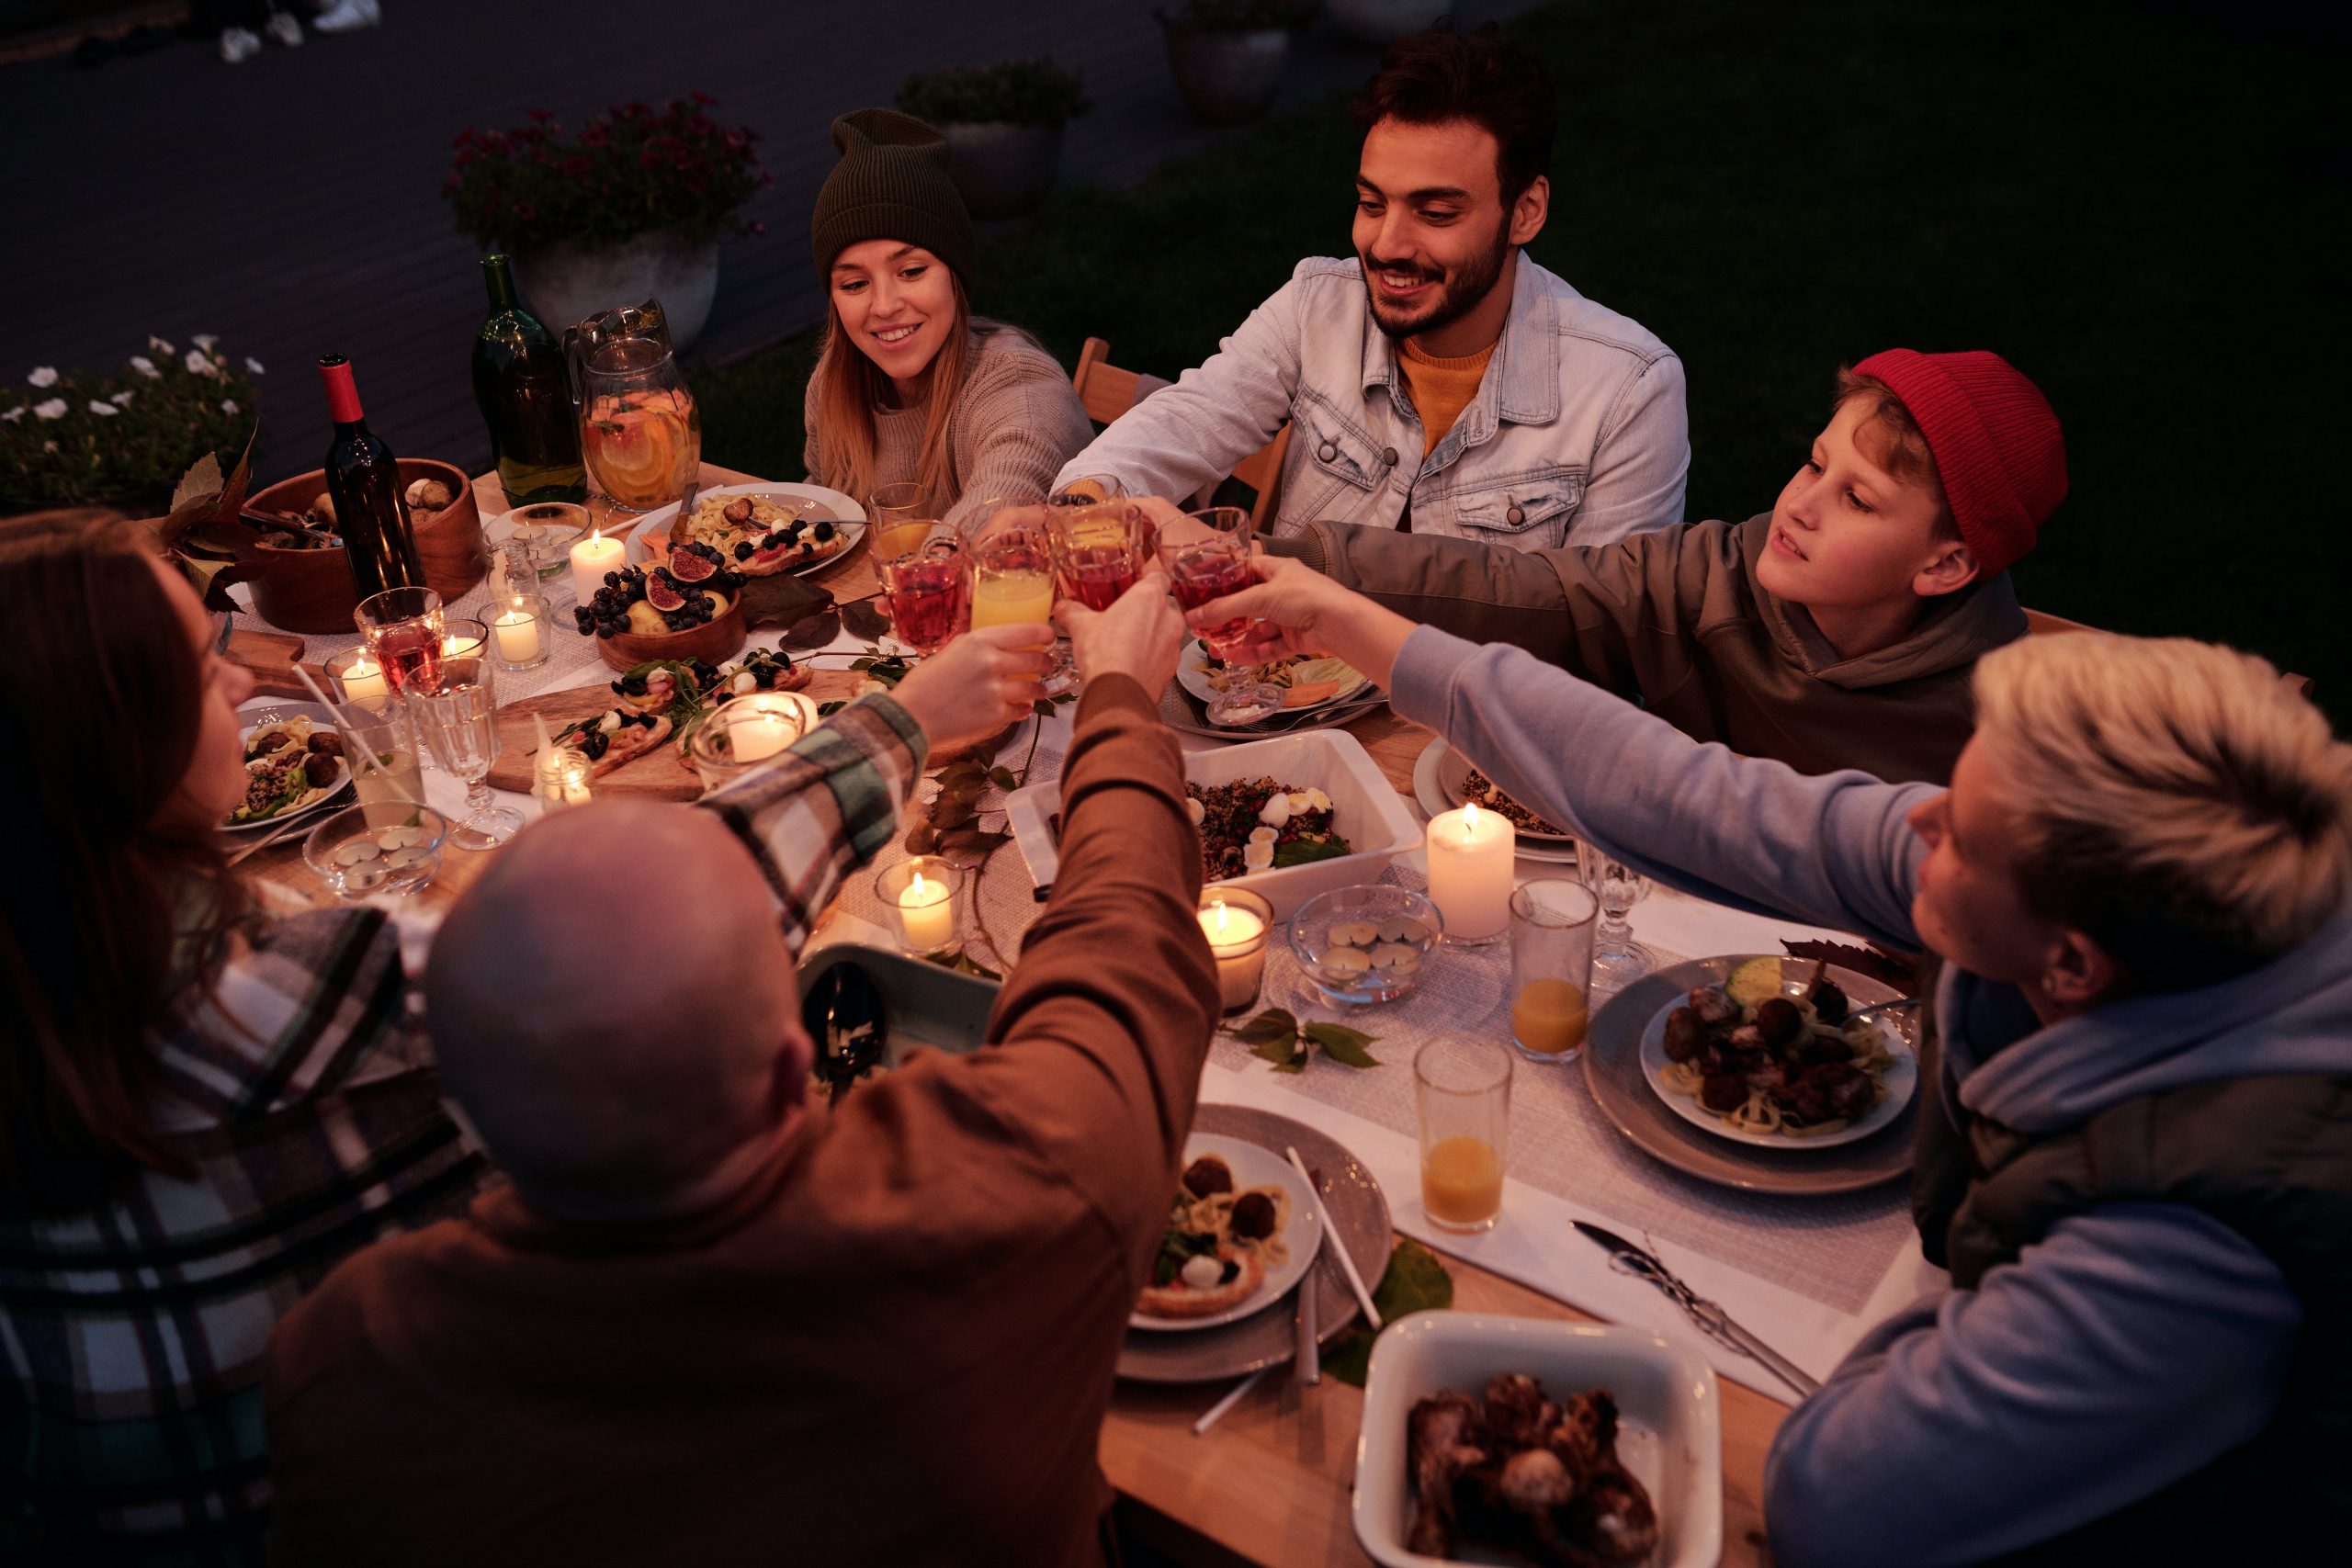 A group of people enjoying an outdoor dinner party with candles and toasting drinks.